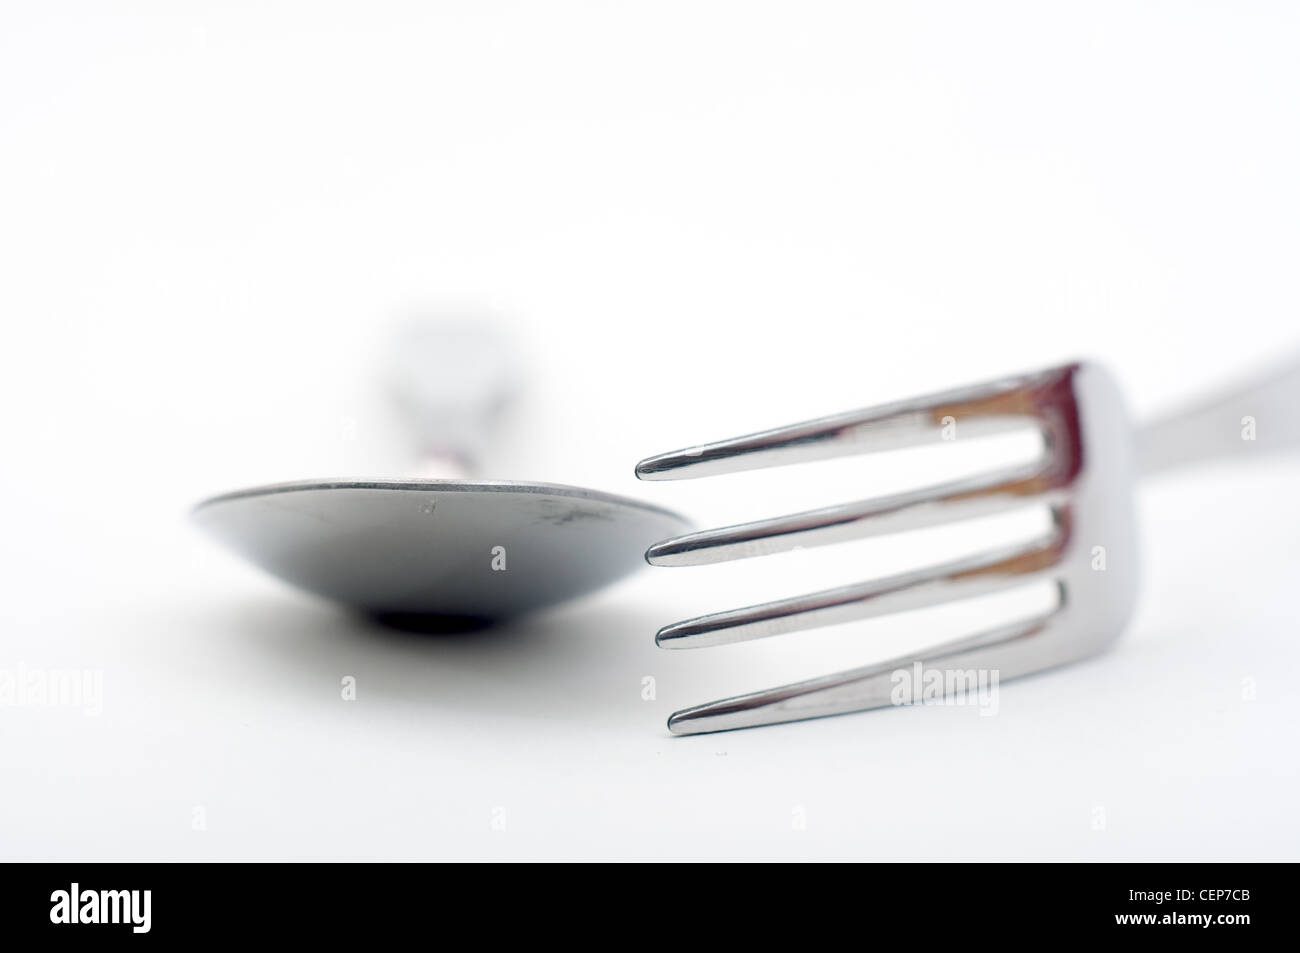 Silver fork and spoon over a white background Stock Photo